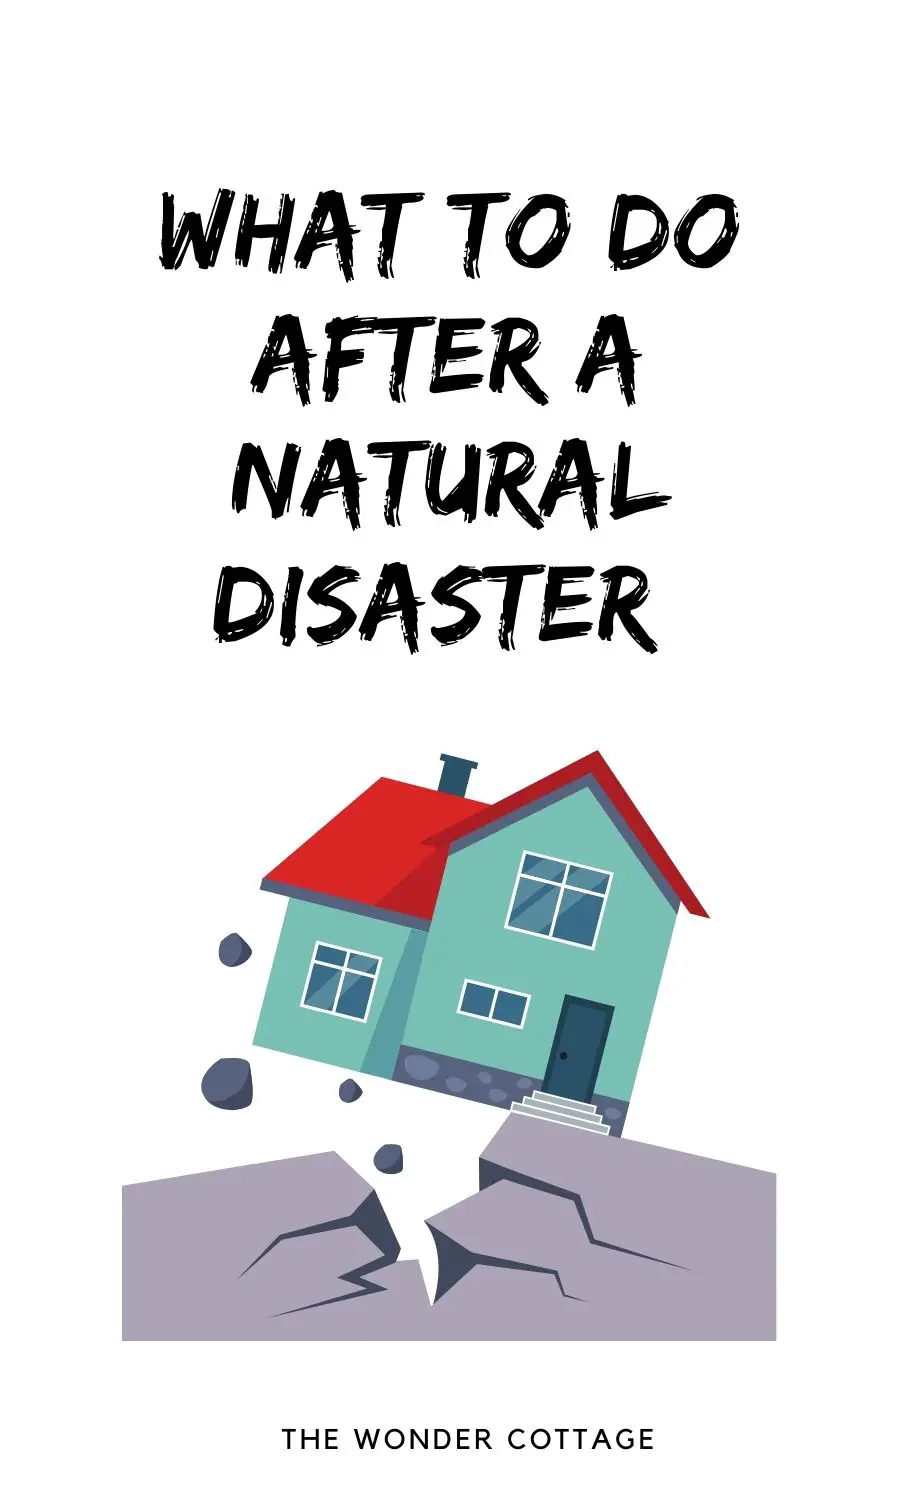 What To Do After A Natural Disaster - Overcoming The Fallout